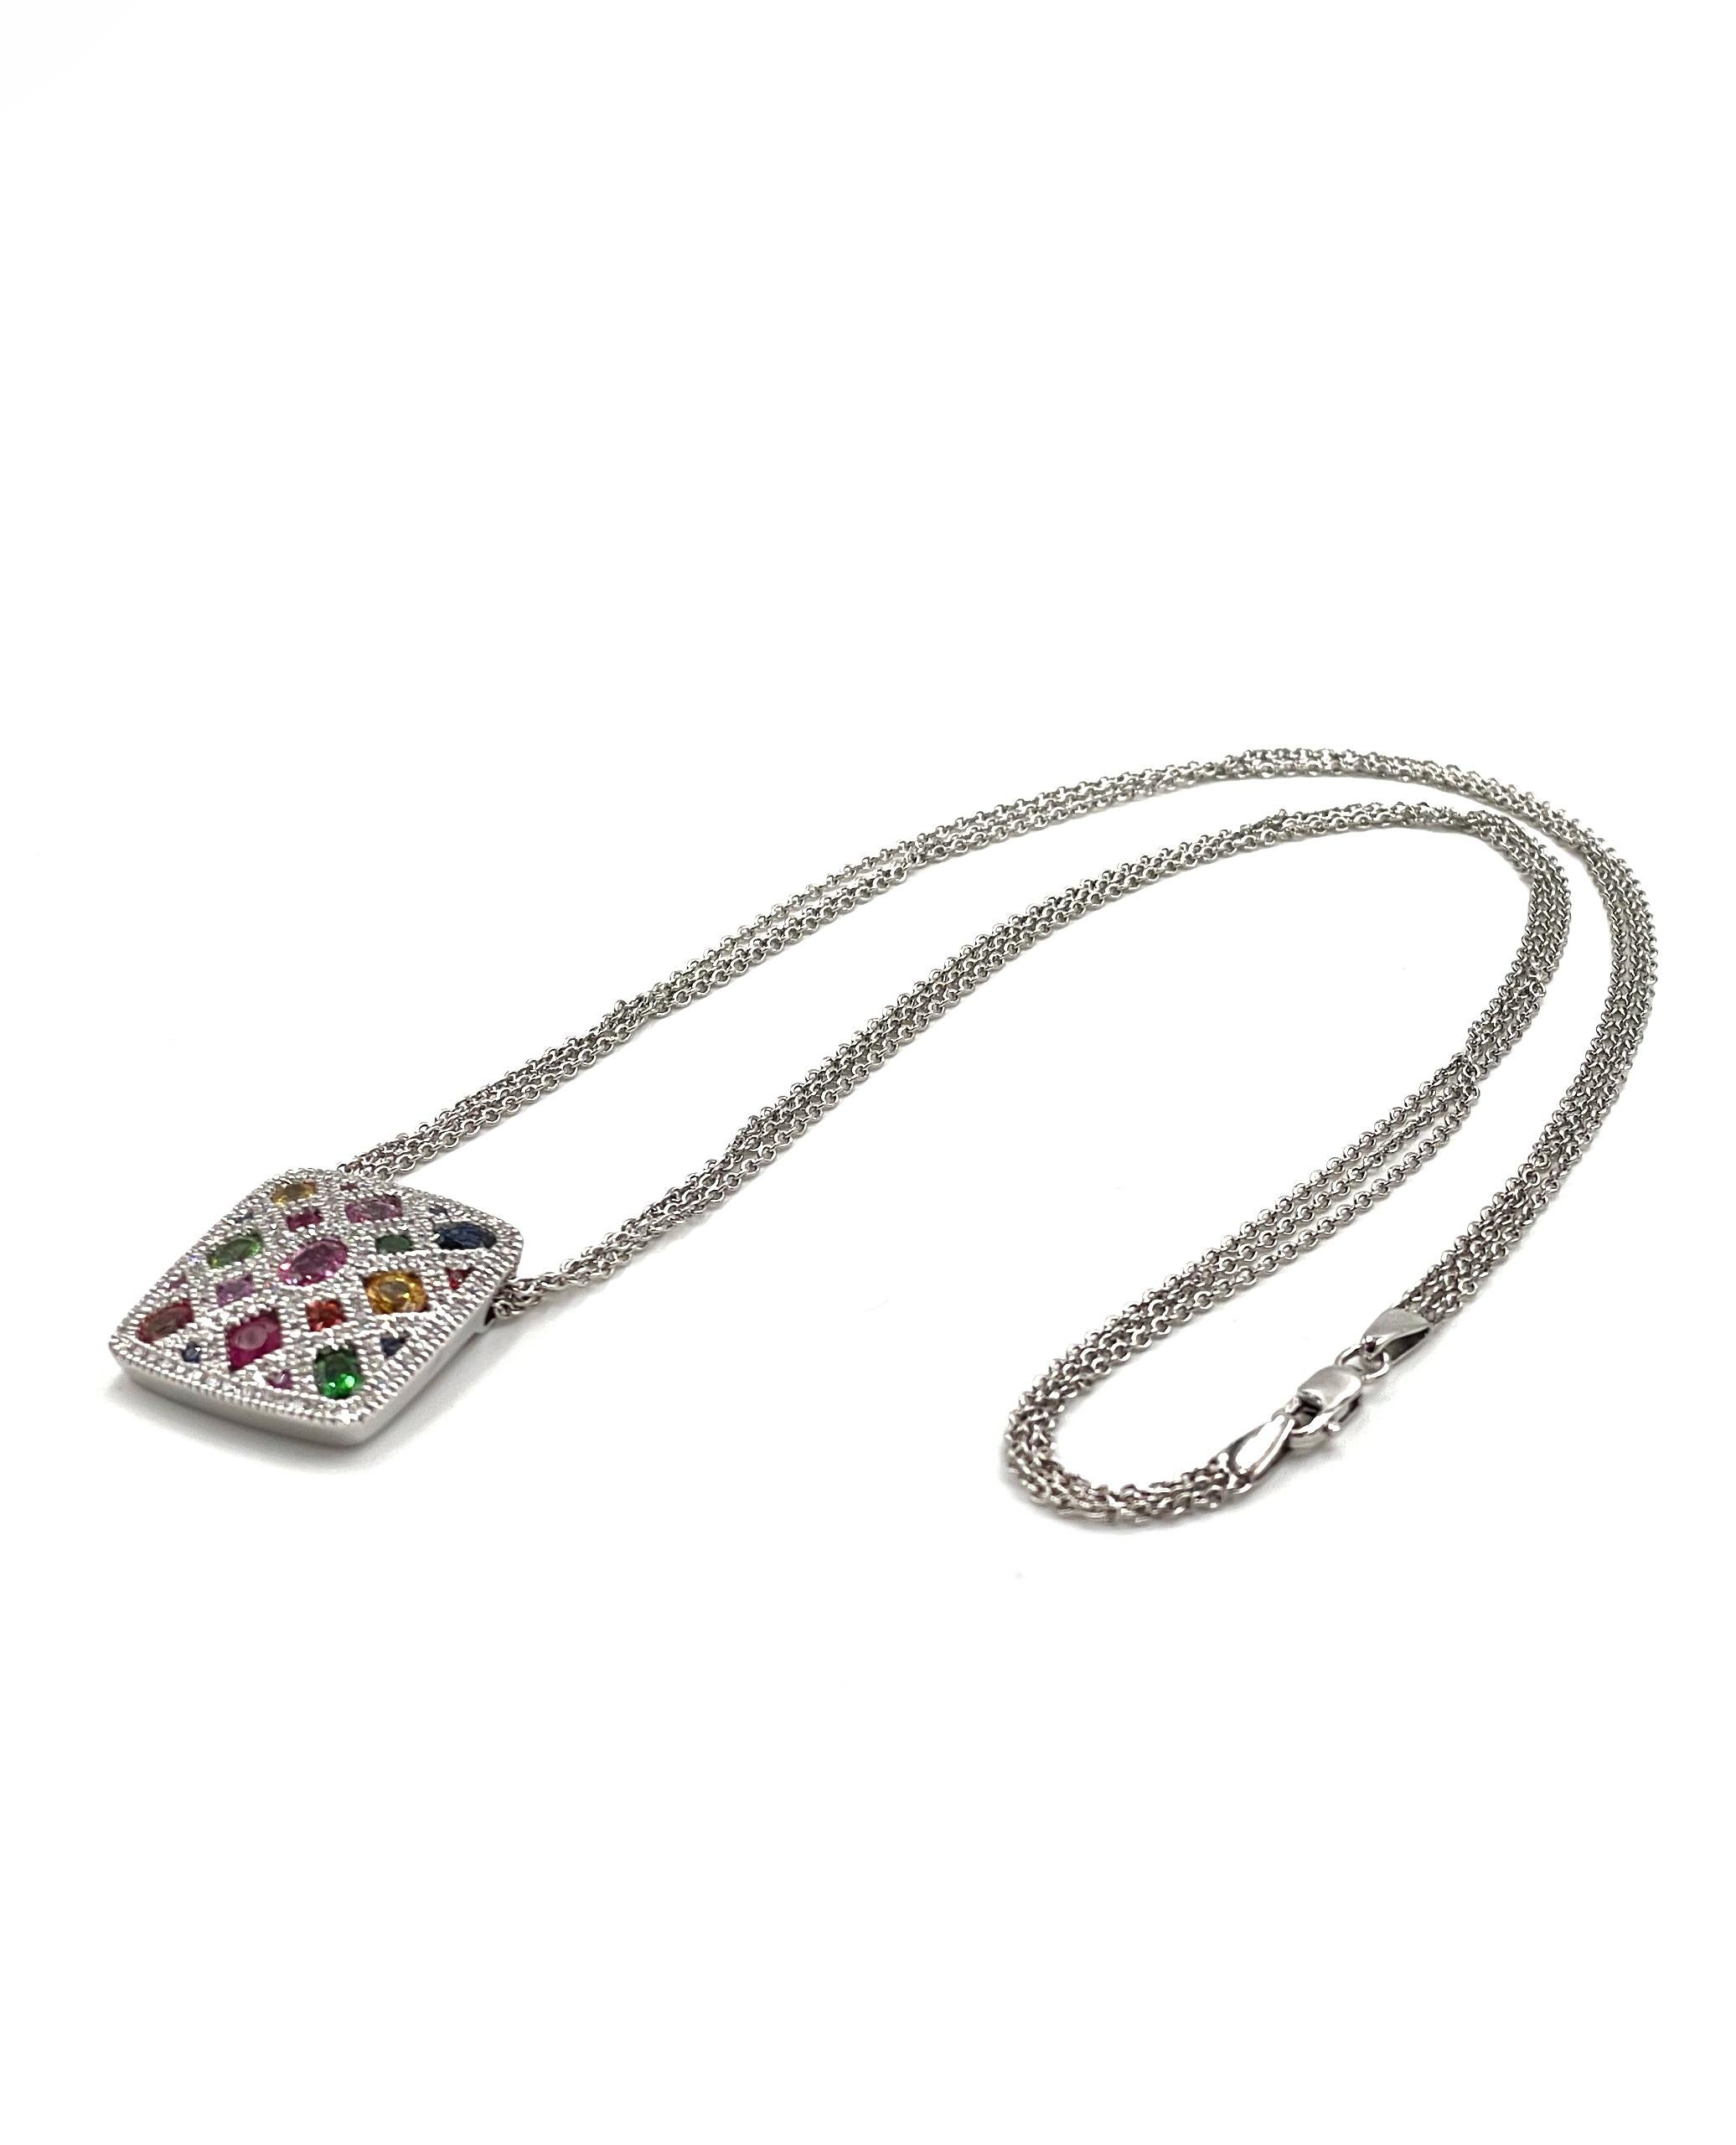 Allison Kaufman 14K white gold square shape pendant with 0.63 carat diamonds and multi colored sapphires, ruby and garnet 2.59 carats total weight. The pendant slides on a 16 inch triple chain with a lobster clasp.